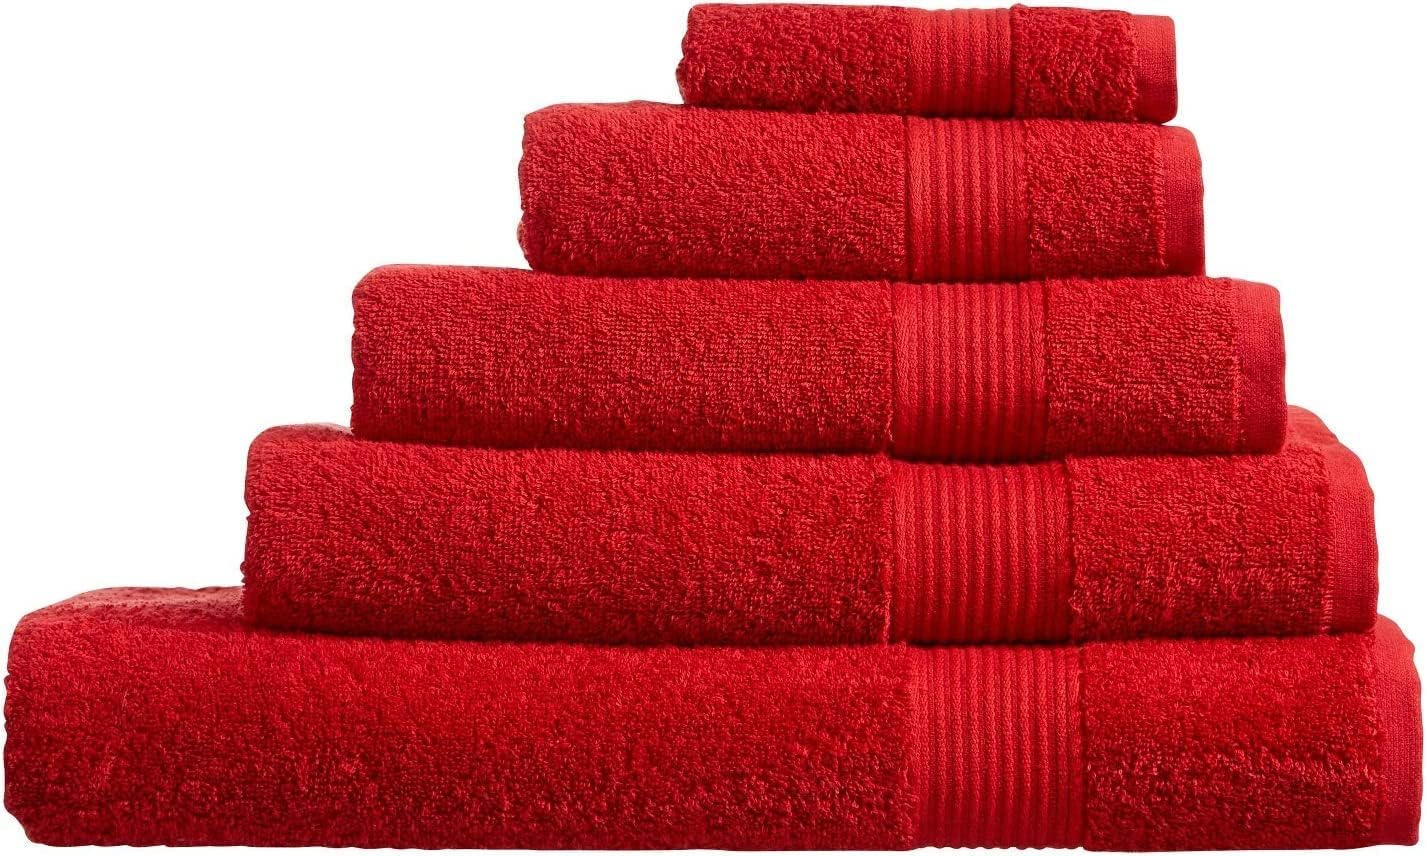 100% Egyptian Cotton Bath Towels Jumbo Sheets 500GSM Super Absorbent Quick Dry Soft Bathroom